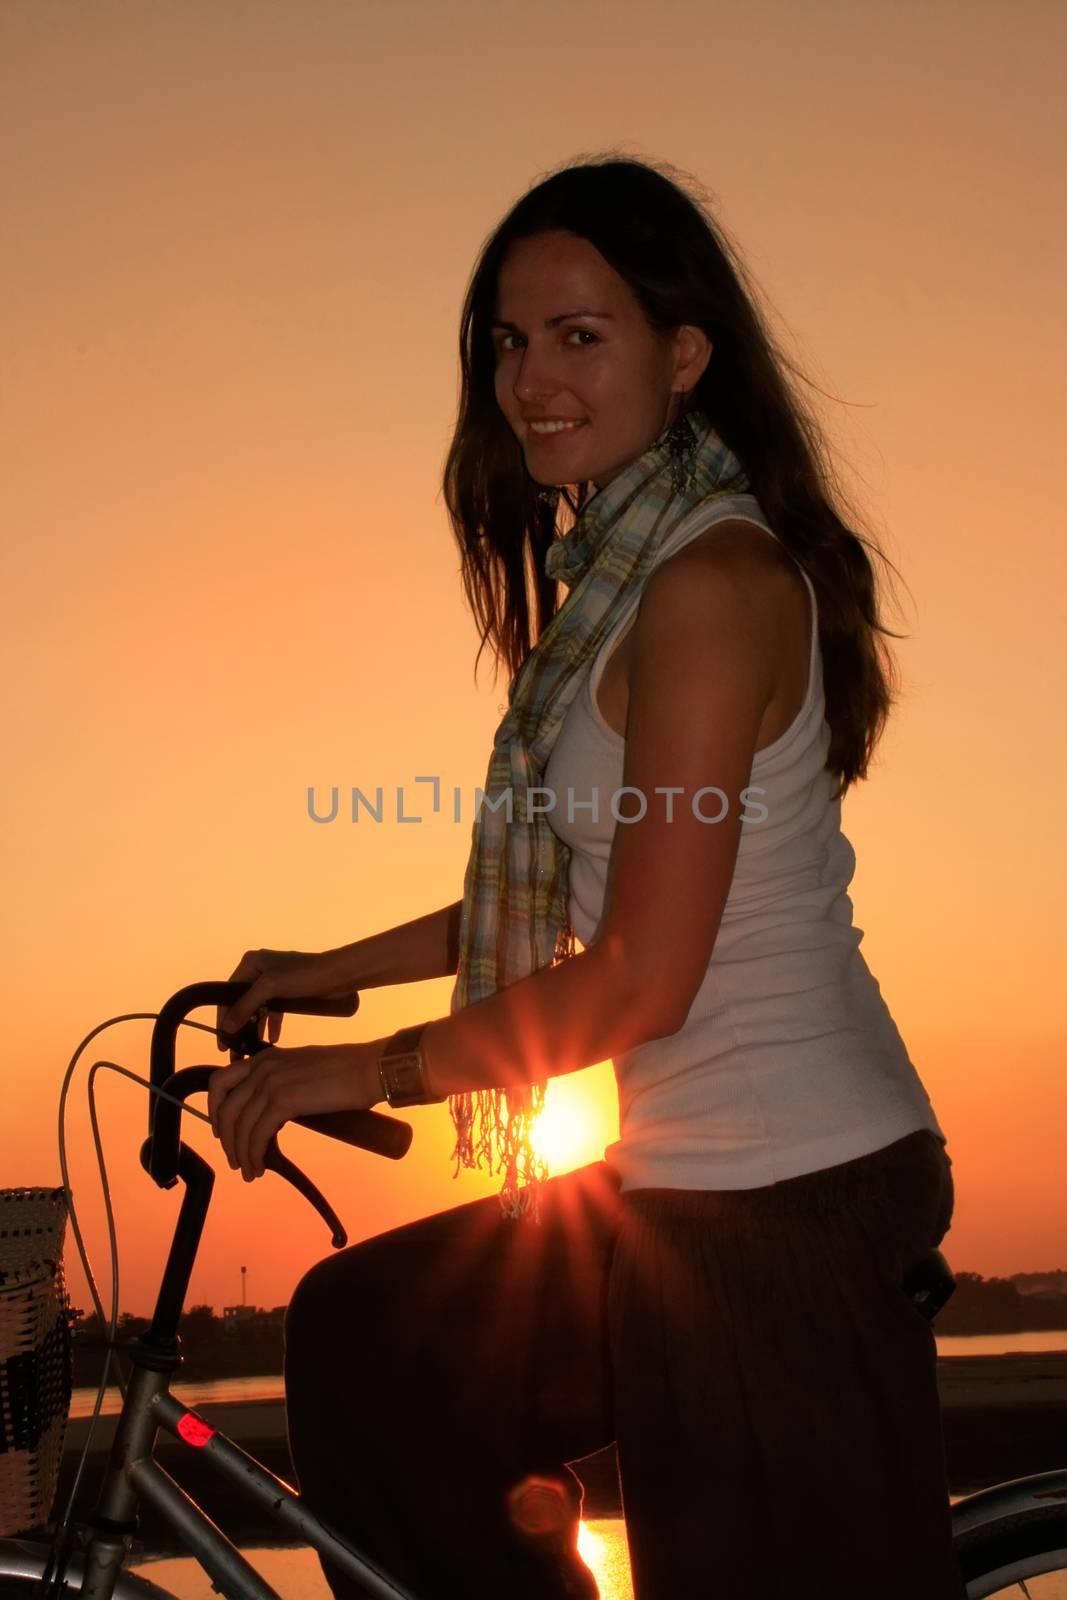 Silhouetted woman with bicycle at Mekong river waterfront at sunset, Vientiane, Laos, Southeast Asia